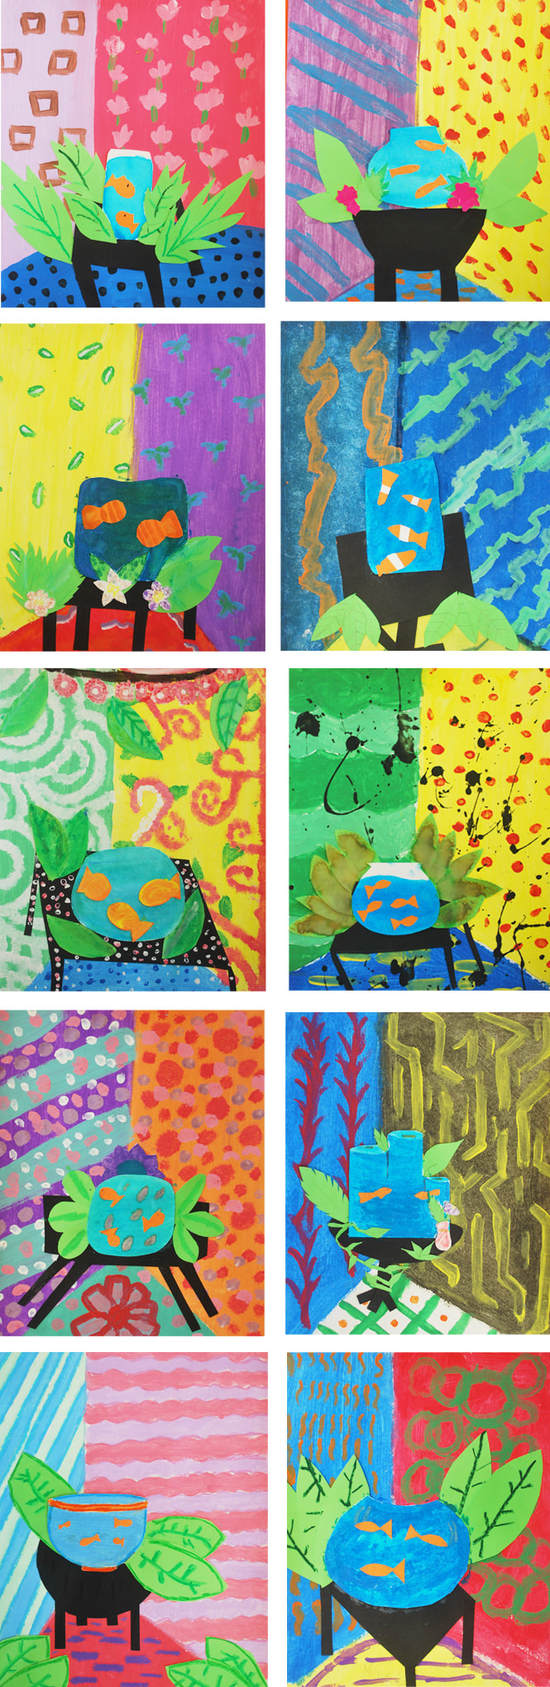 Matisse-Inspired Collages 6th Grade Art Project